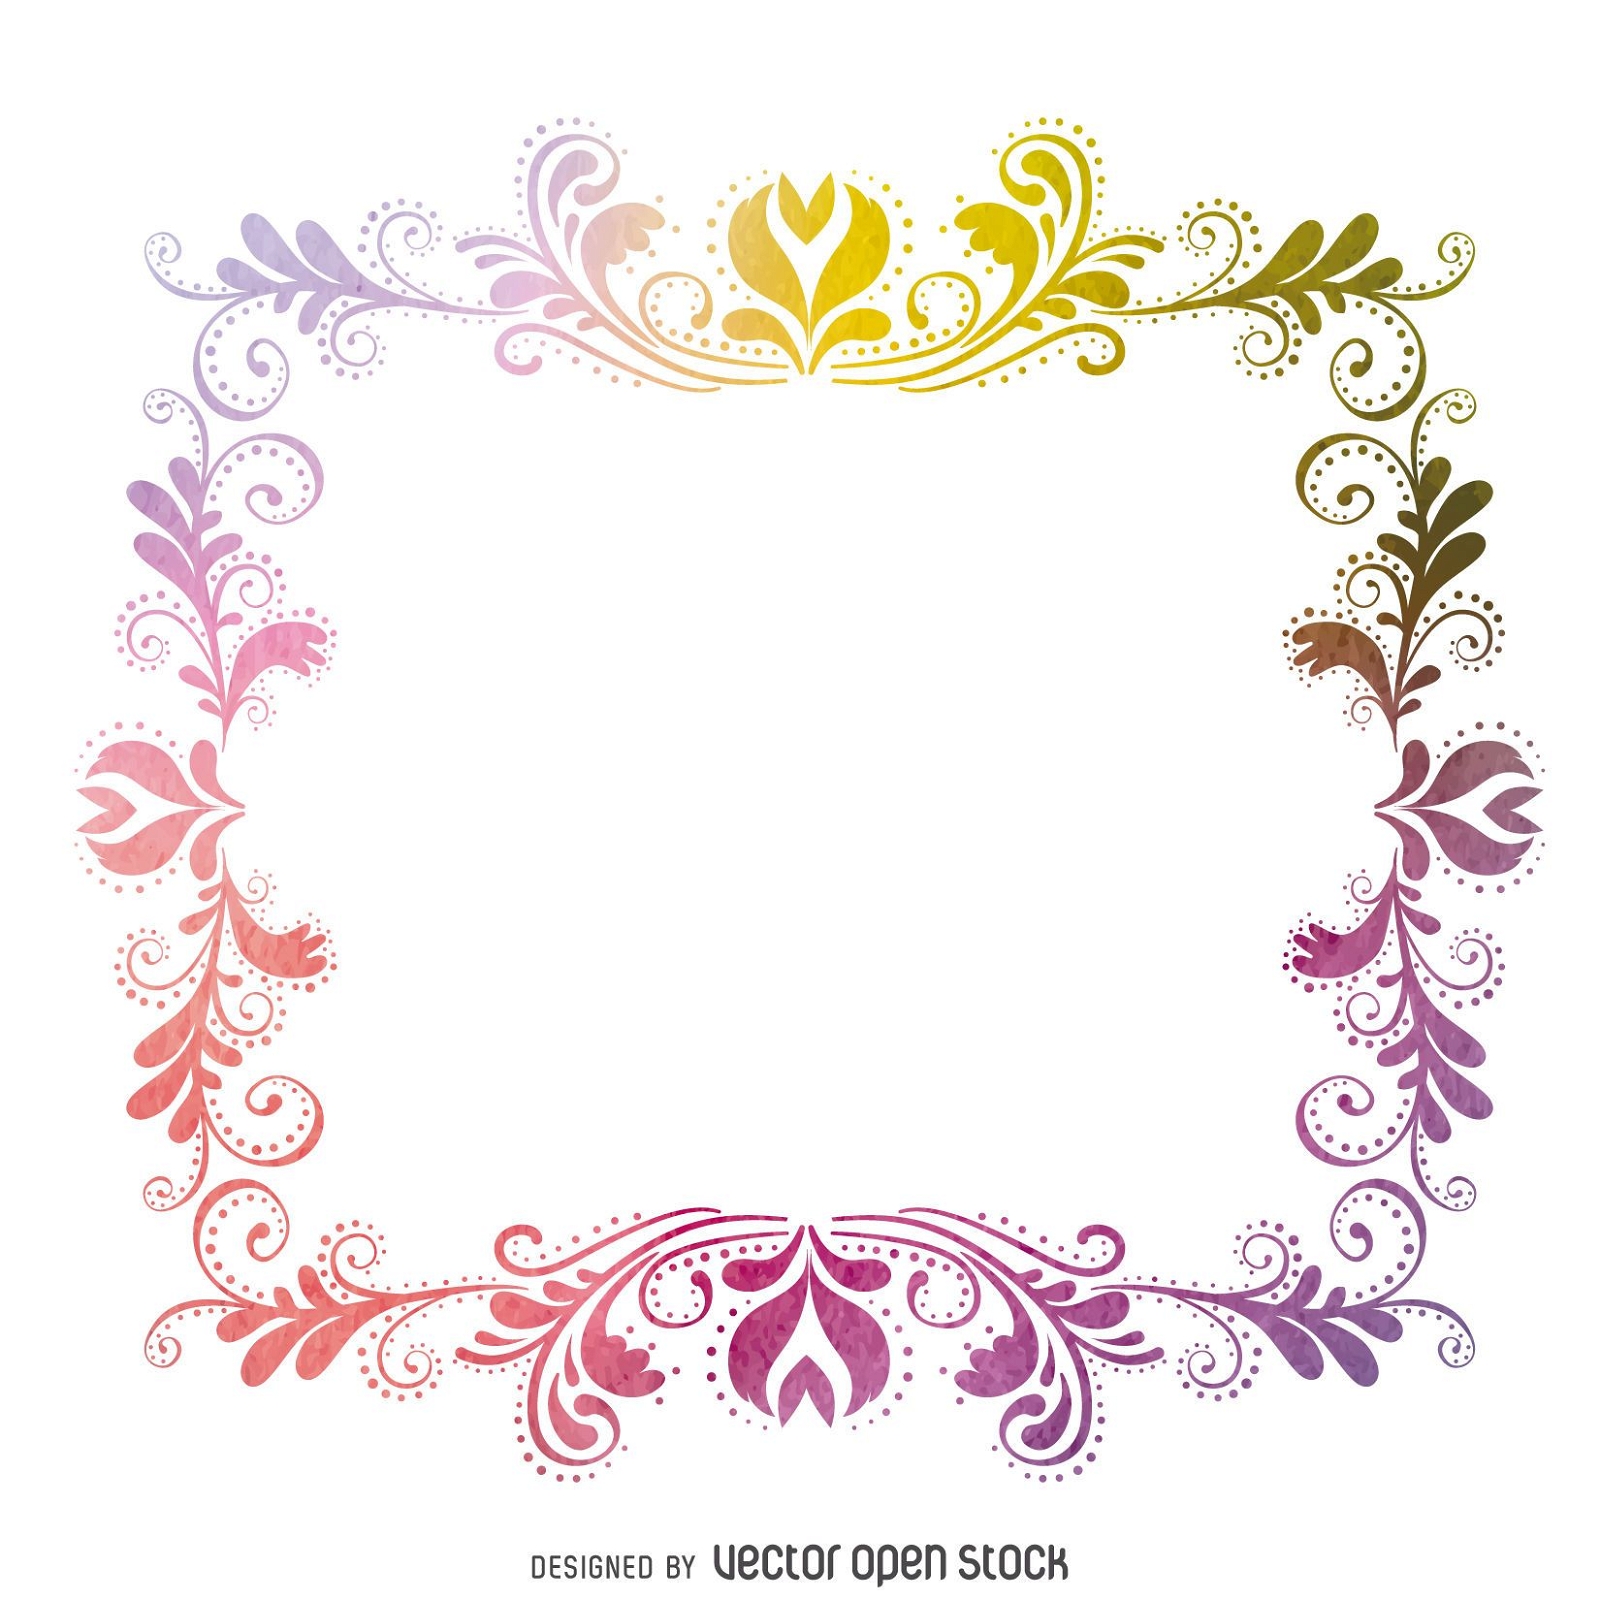 Isolated watercolor swirls frame